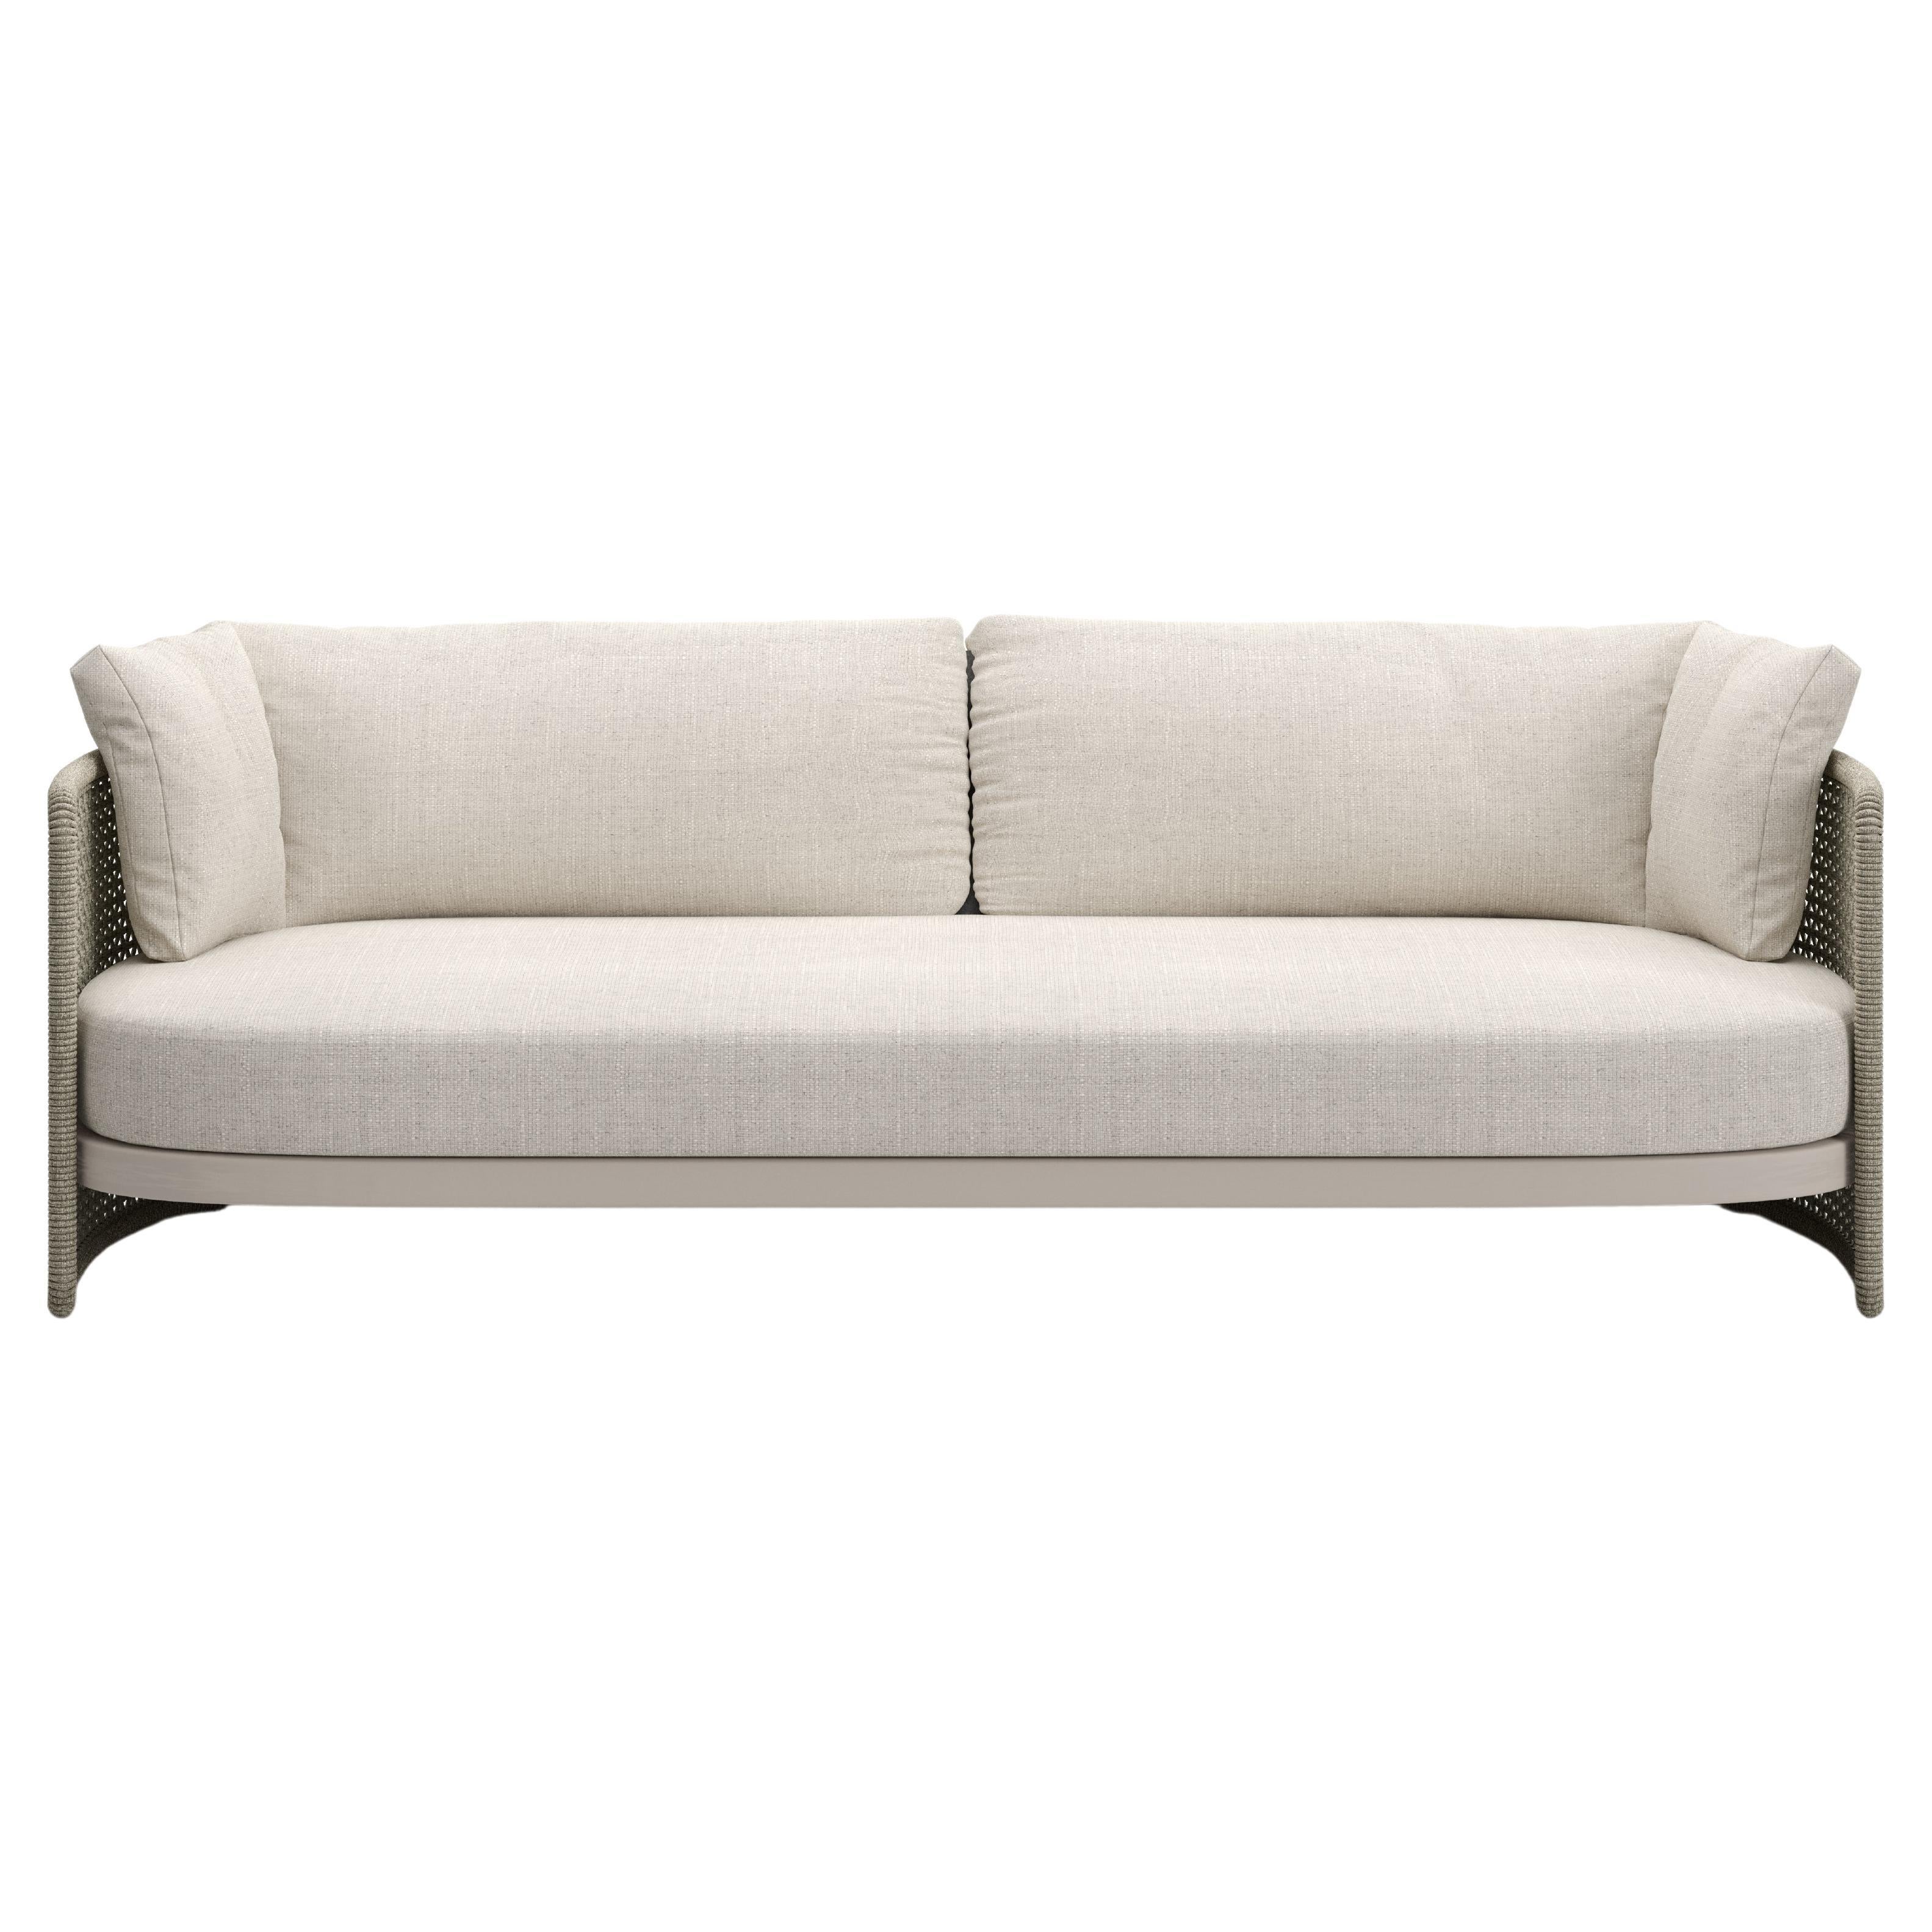 Miura-bisque Outdoor 3 Seater Sofa by SNOC